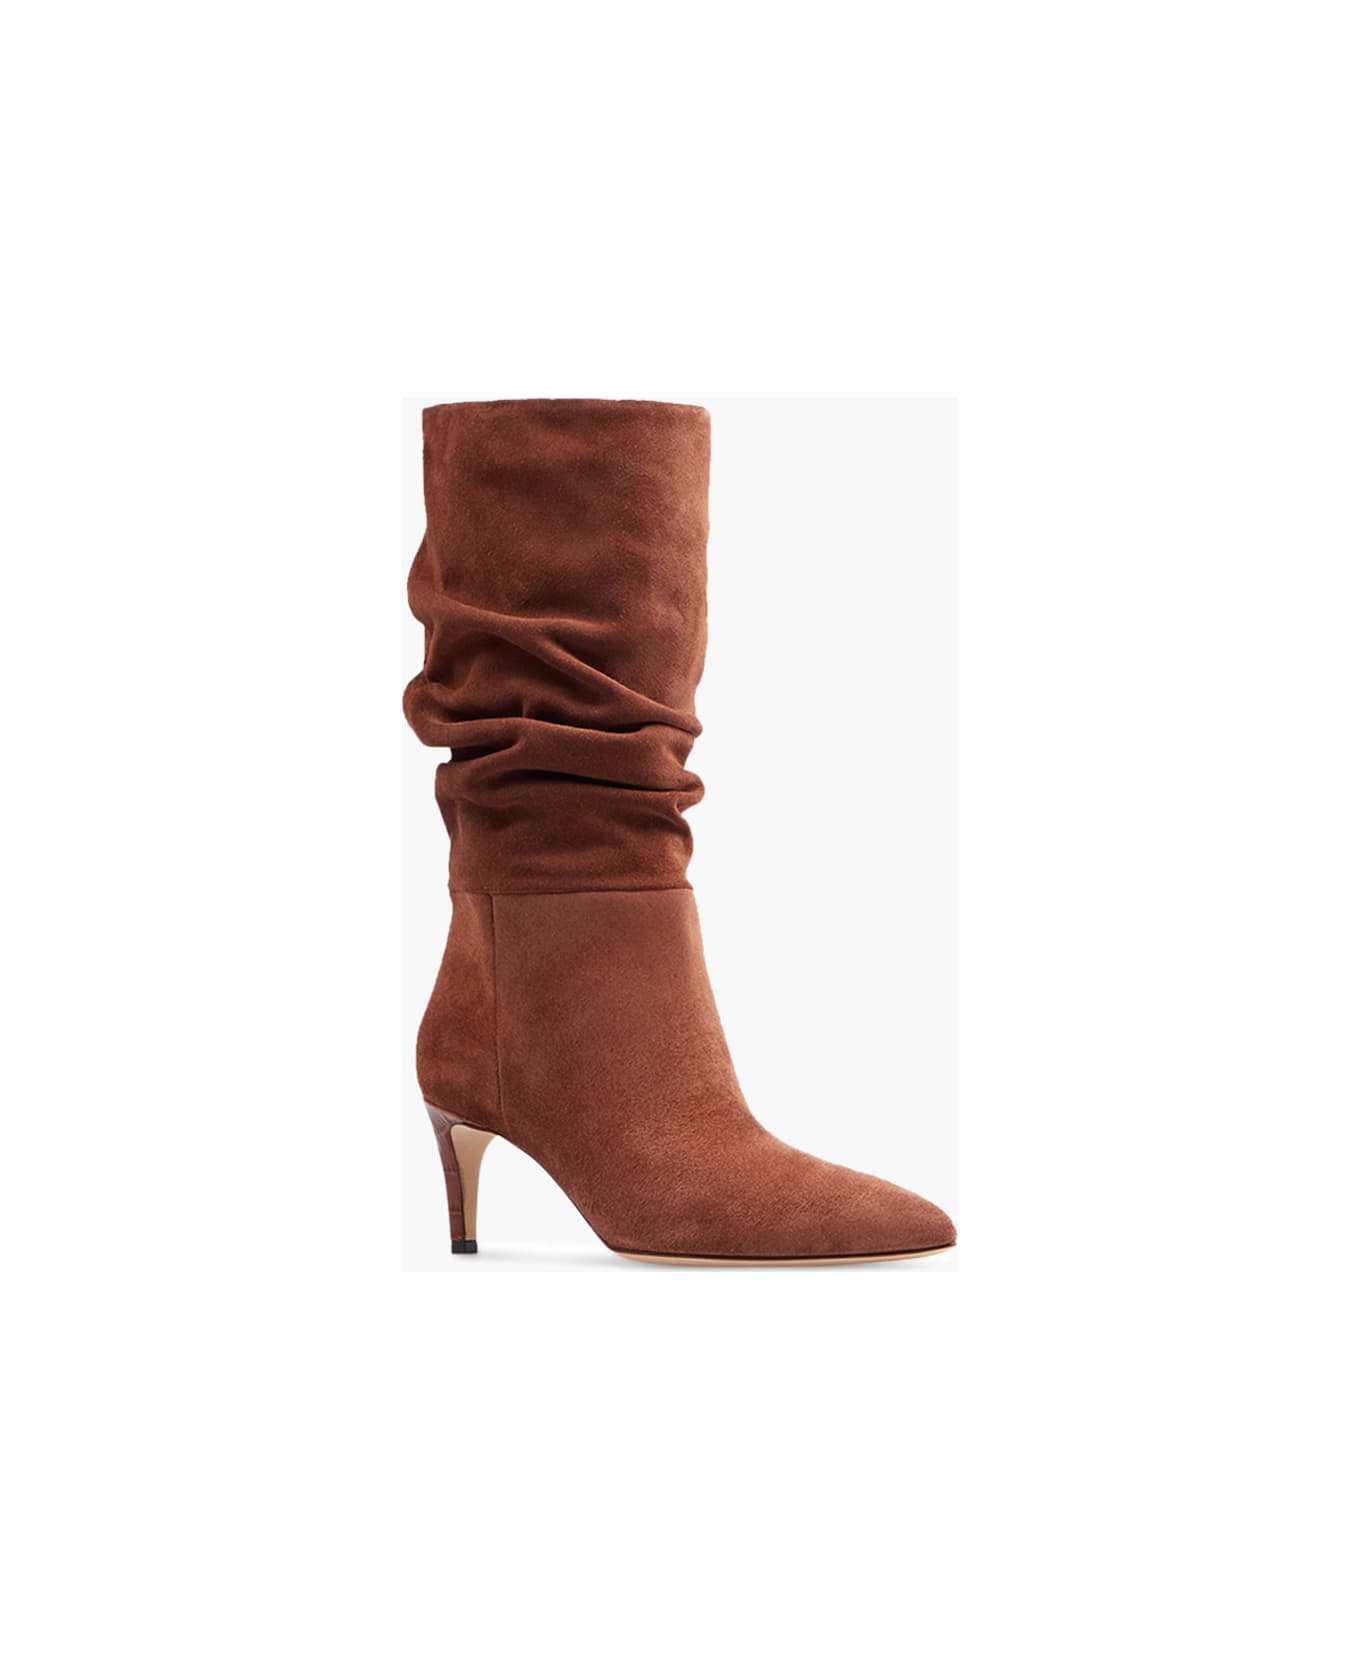 Paris Texas Slouchy Suede Boots - CANYON